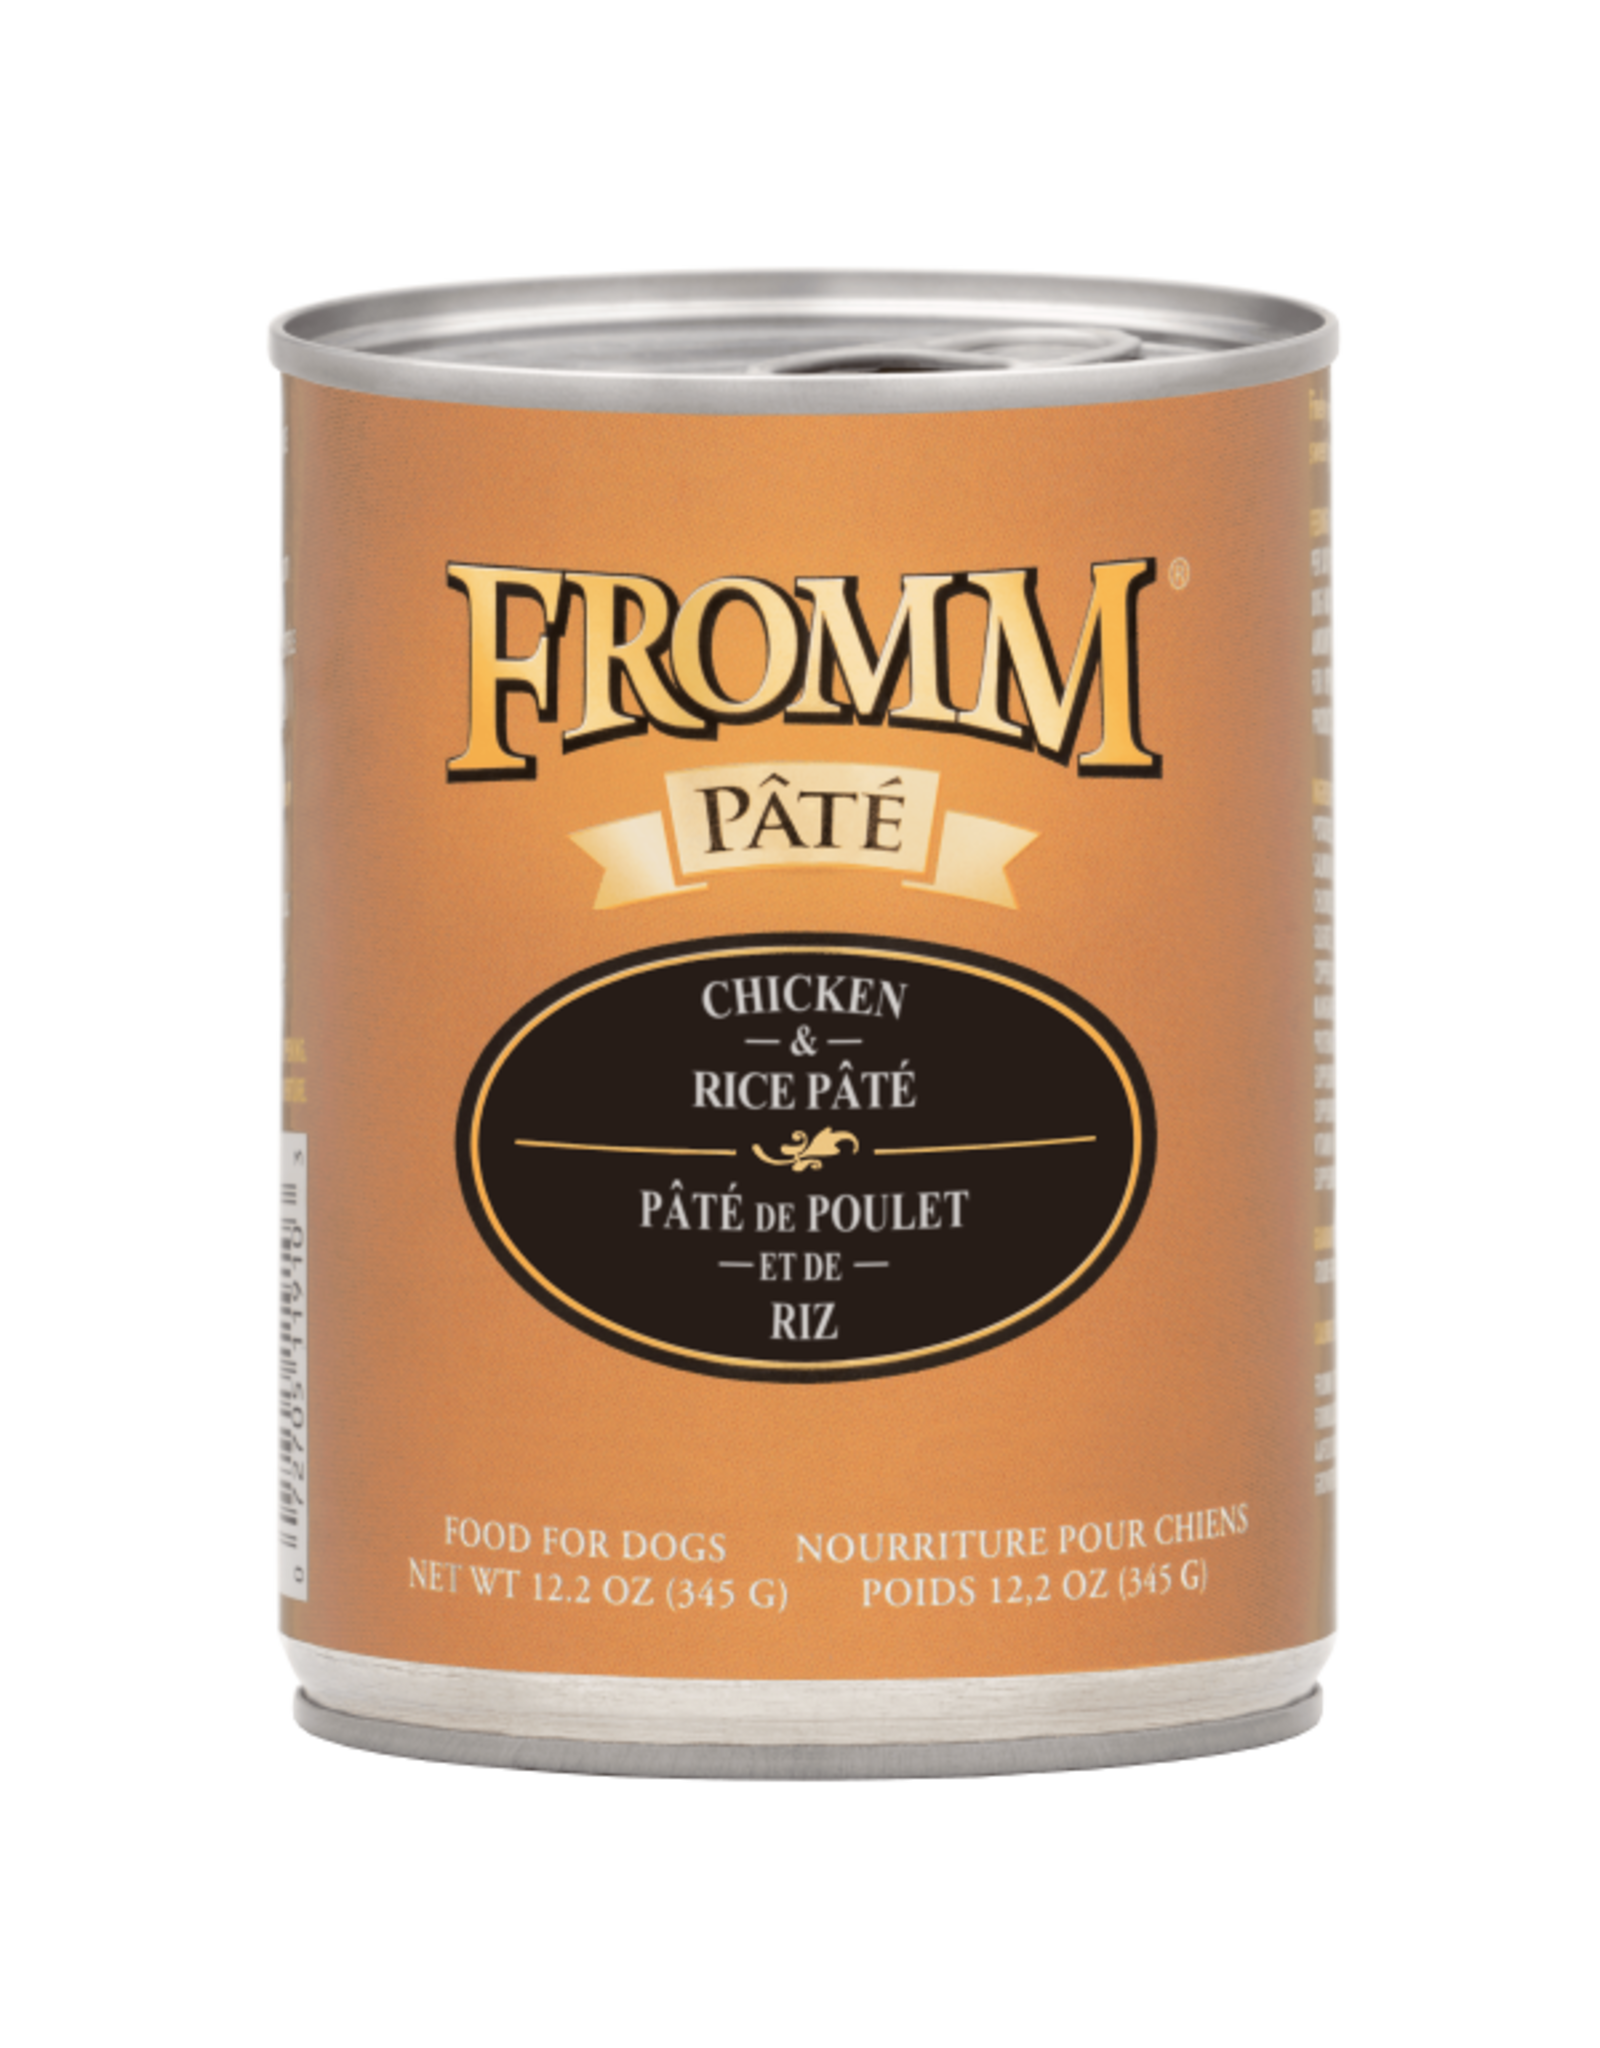 Fromm Dog Chicken & Rice Pate 12.2 oz